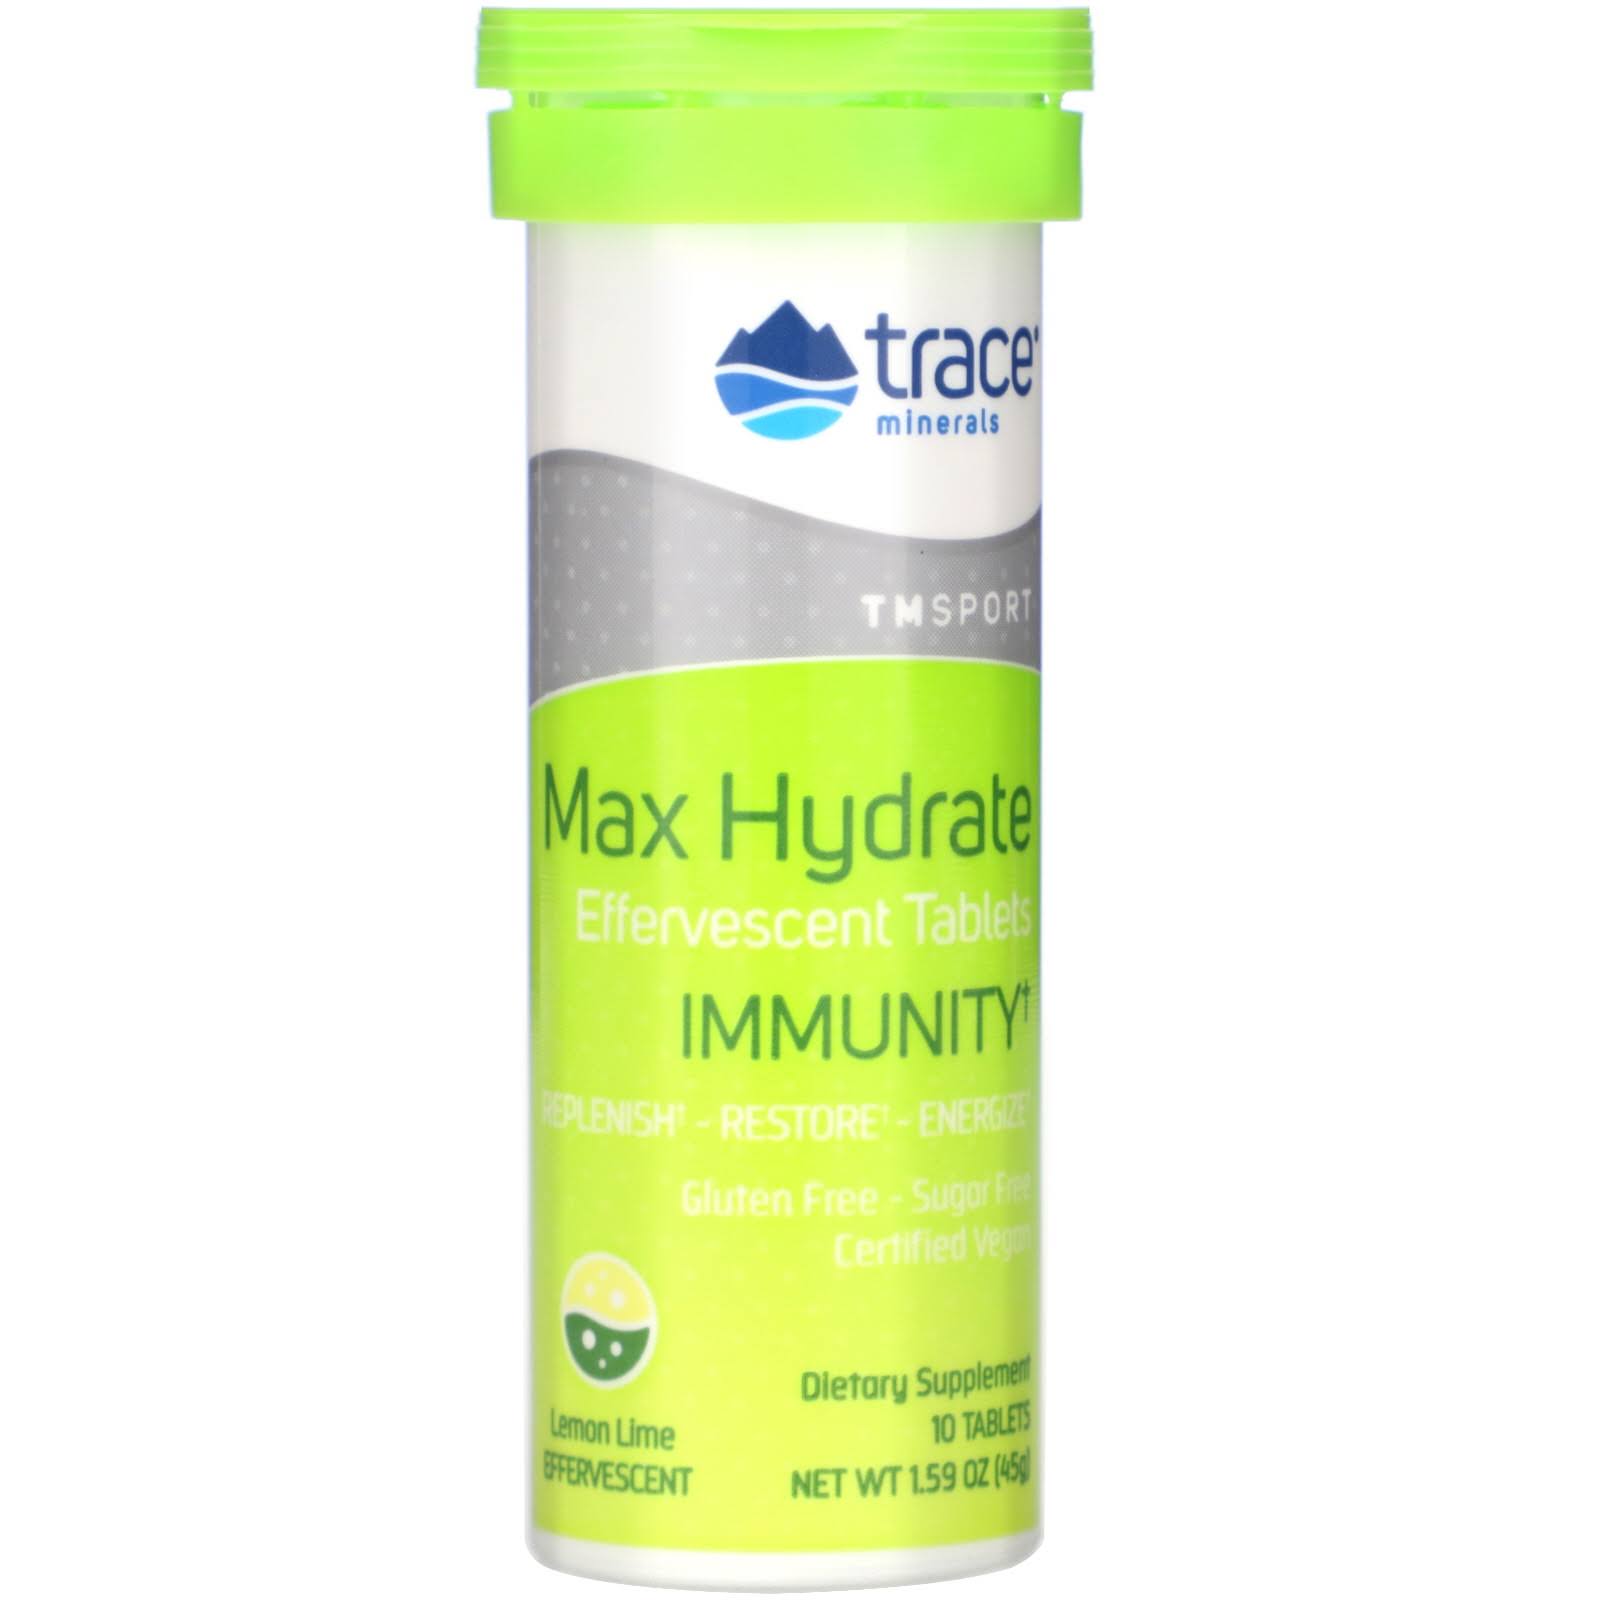 Max Hydrate Immunity Effervescent Tablets Lemon Lime Trace Minerals Research